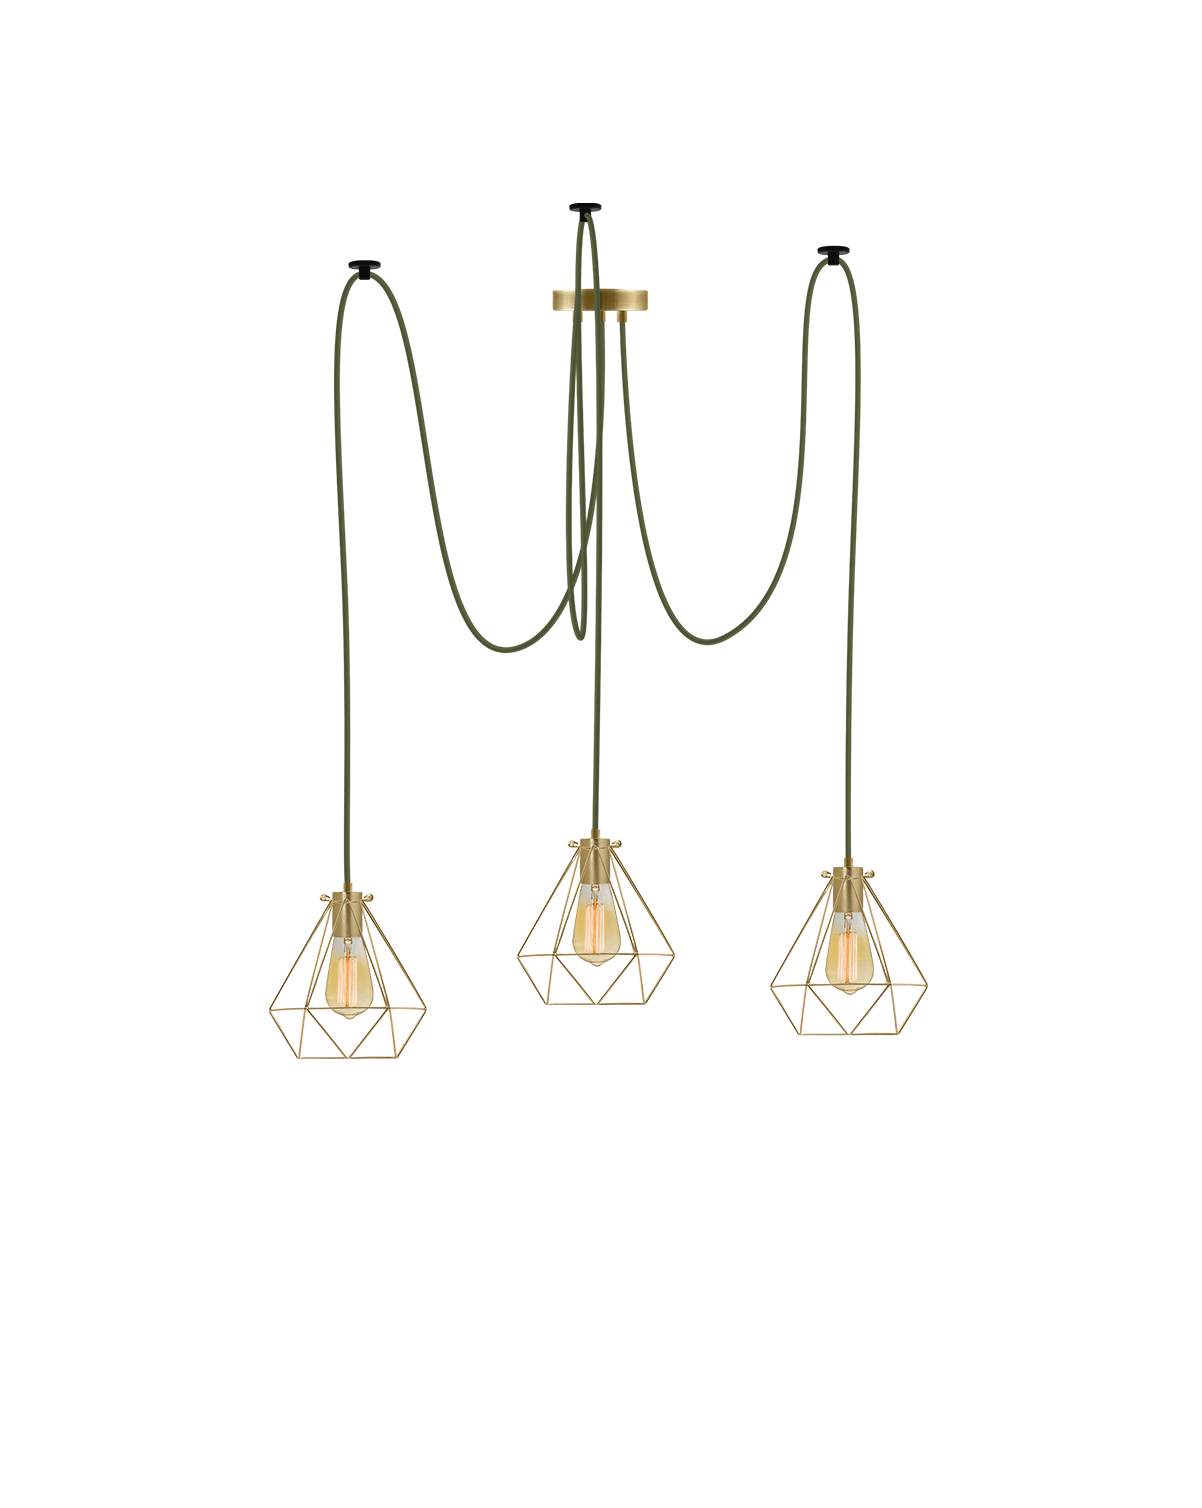 Swag Chandelier: Olive with Brass Diamond Cages Hangout Lighting 3 Swag